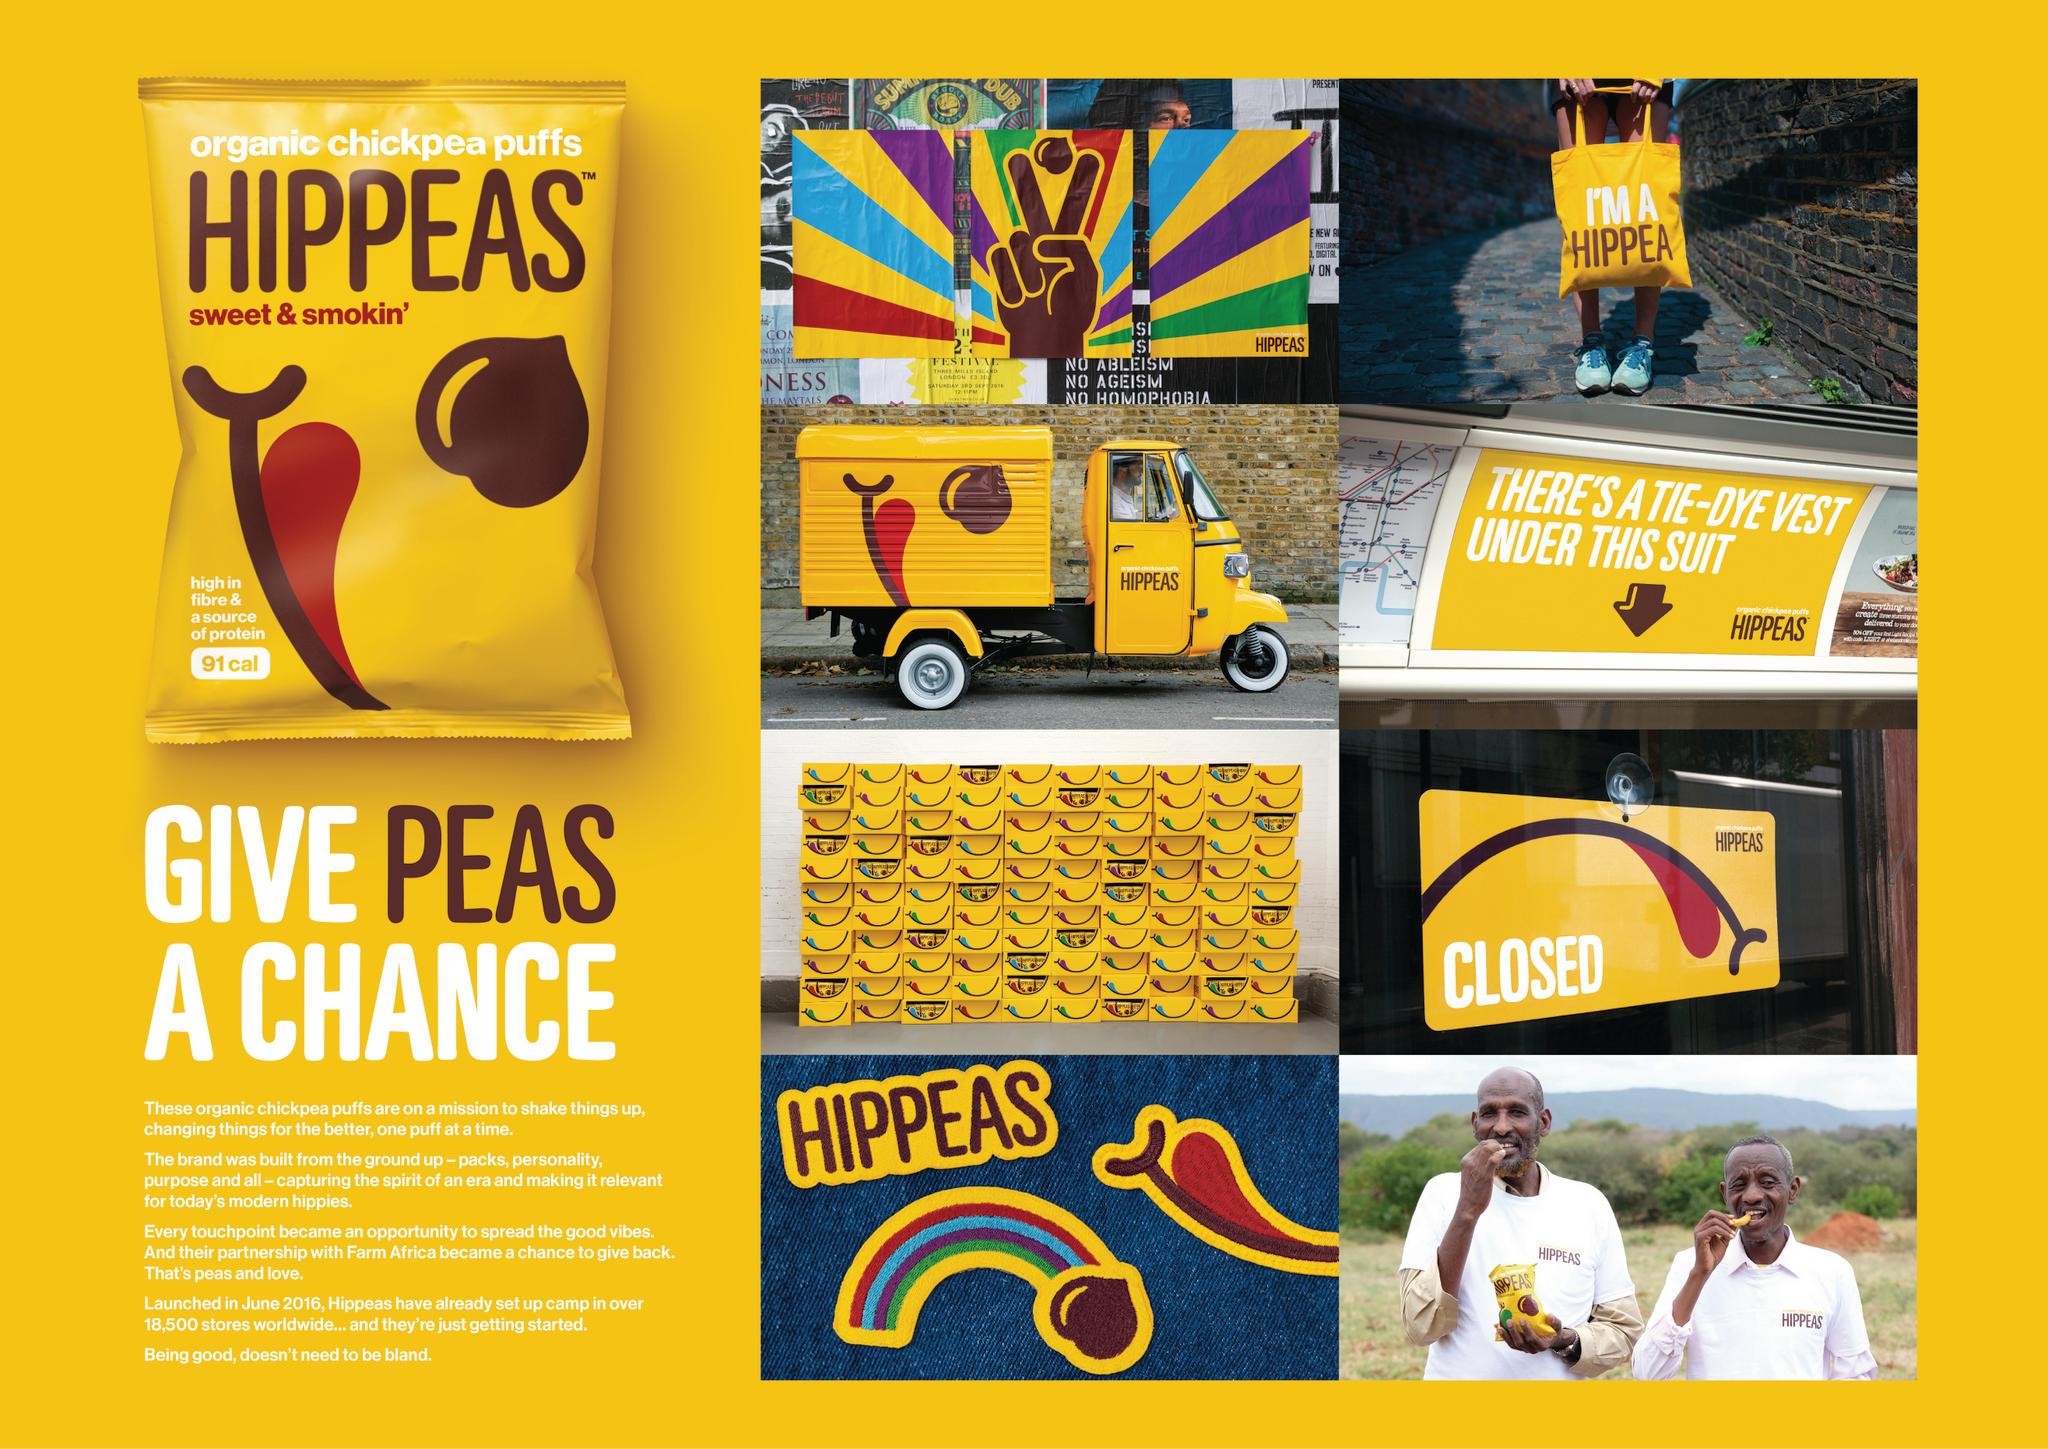 HIPPEAS. REVOLUTIONISING THE GLOBAL SNACKING MARKET